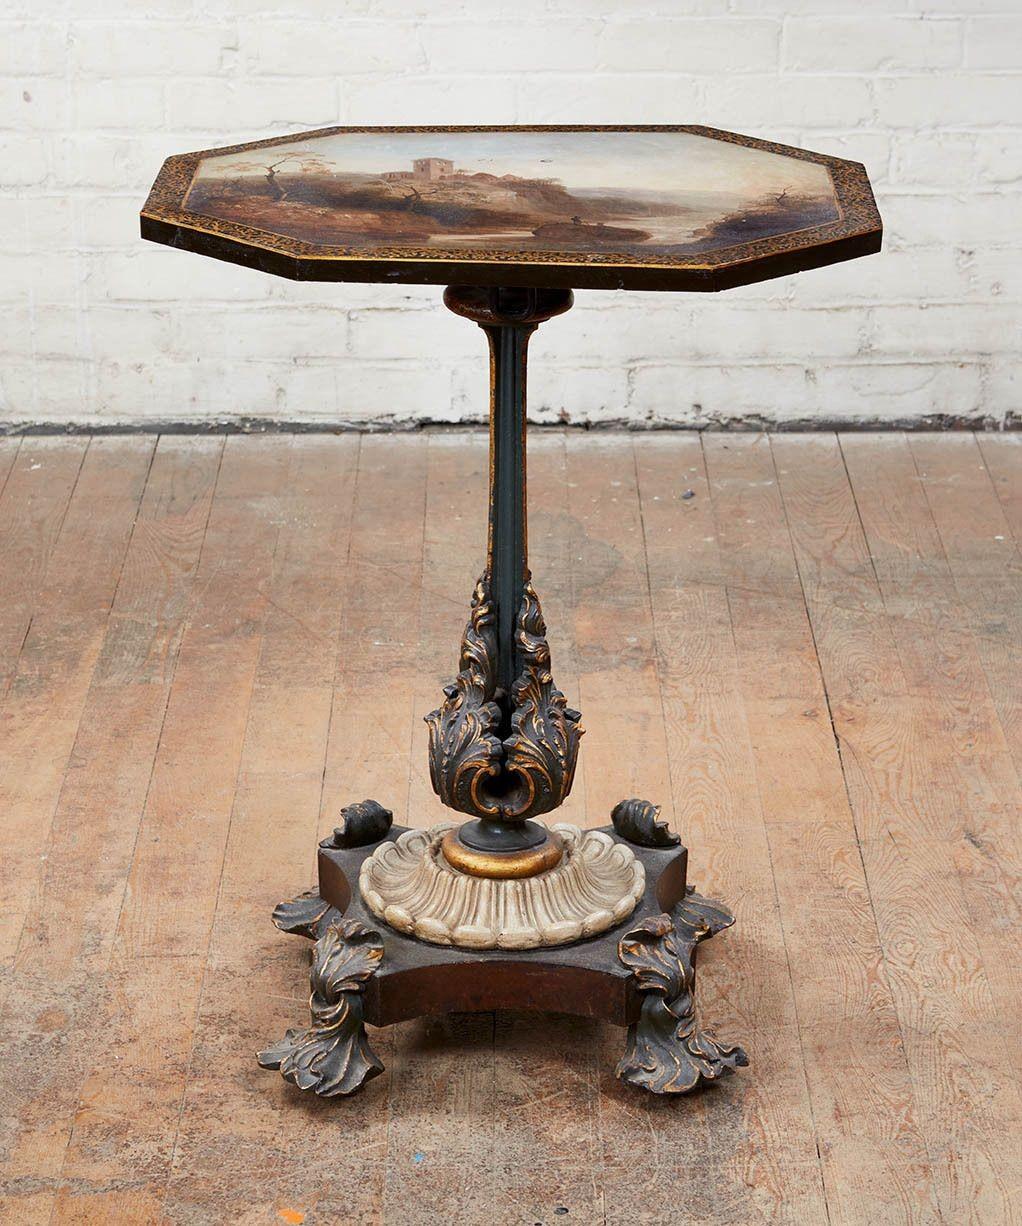 Fine and unusual English mid-19th century cast iron octagonal tilt top table, the top with painted landscape depicting two fishermen on a rock in a river with ruined abbey in the background, possibly after Edwin Landseer, with gilt seaweed border,